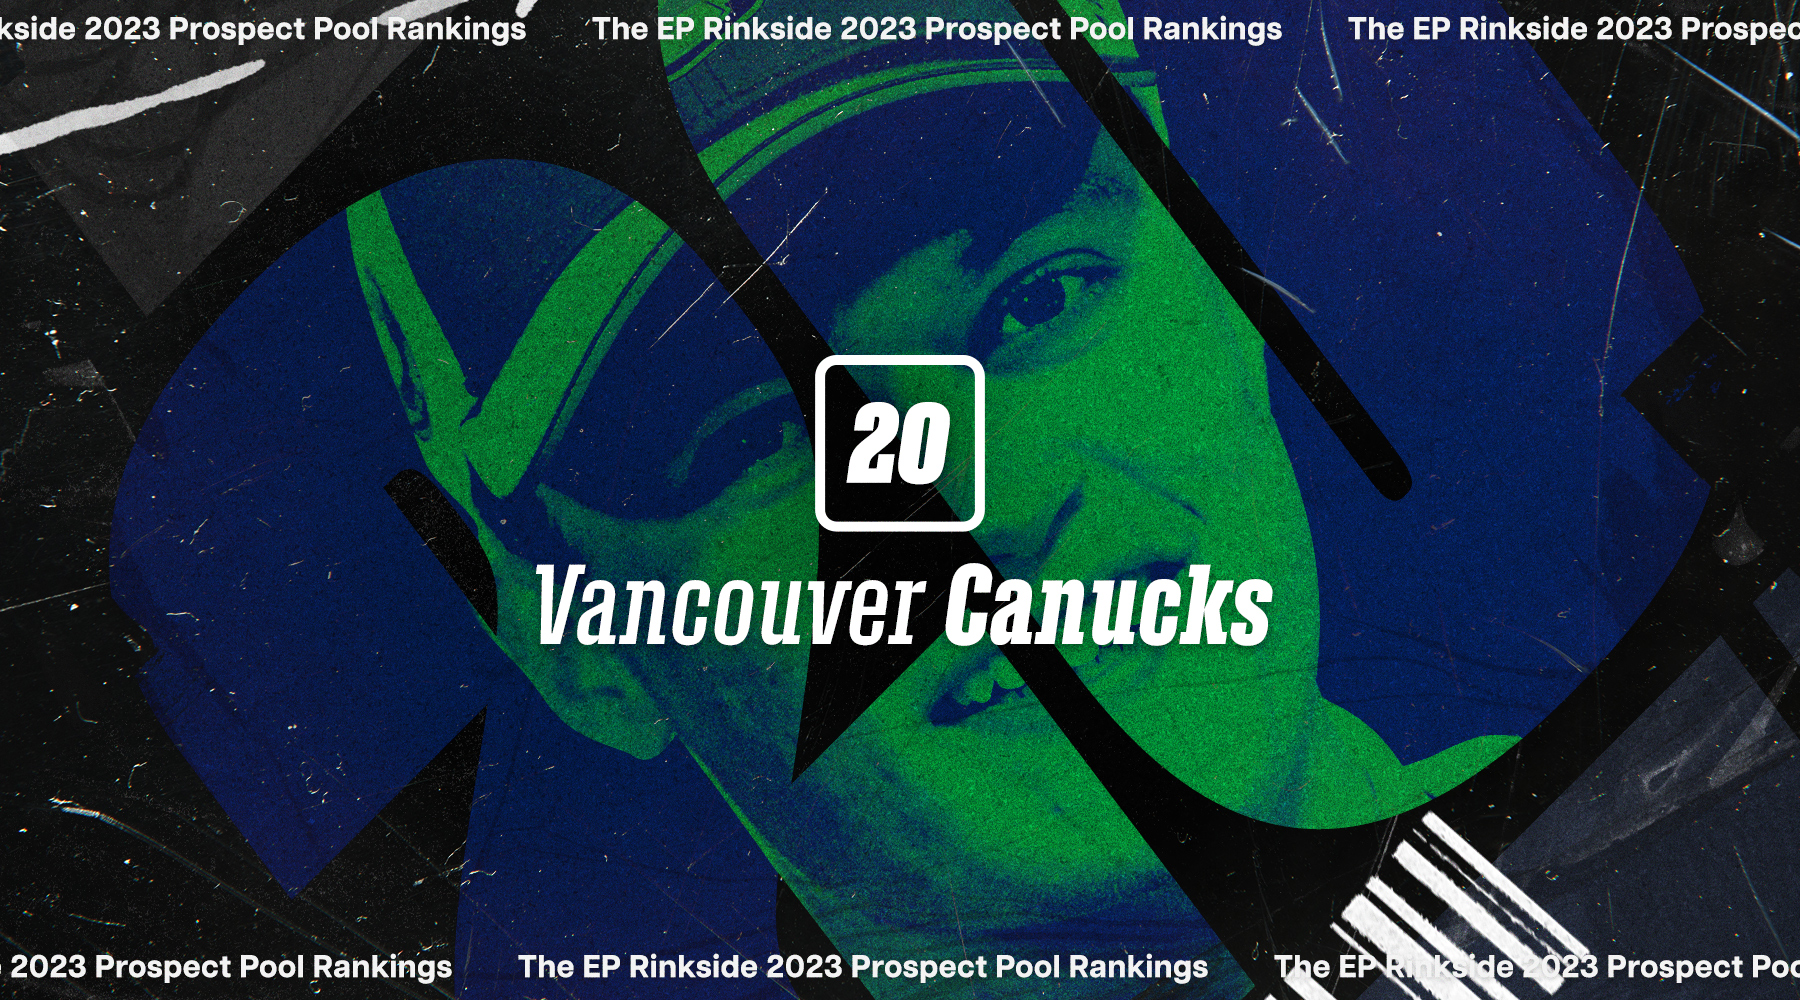 EP Rinkside 2023 Prospect Pool Rankings: No. 20-ranked Vancouver Canucks